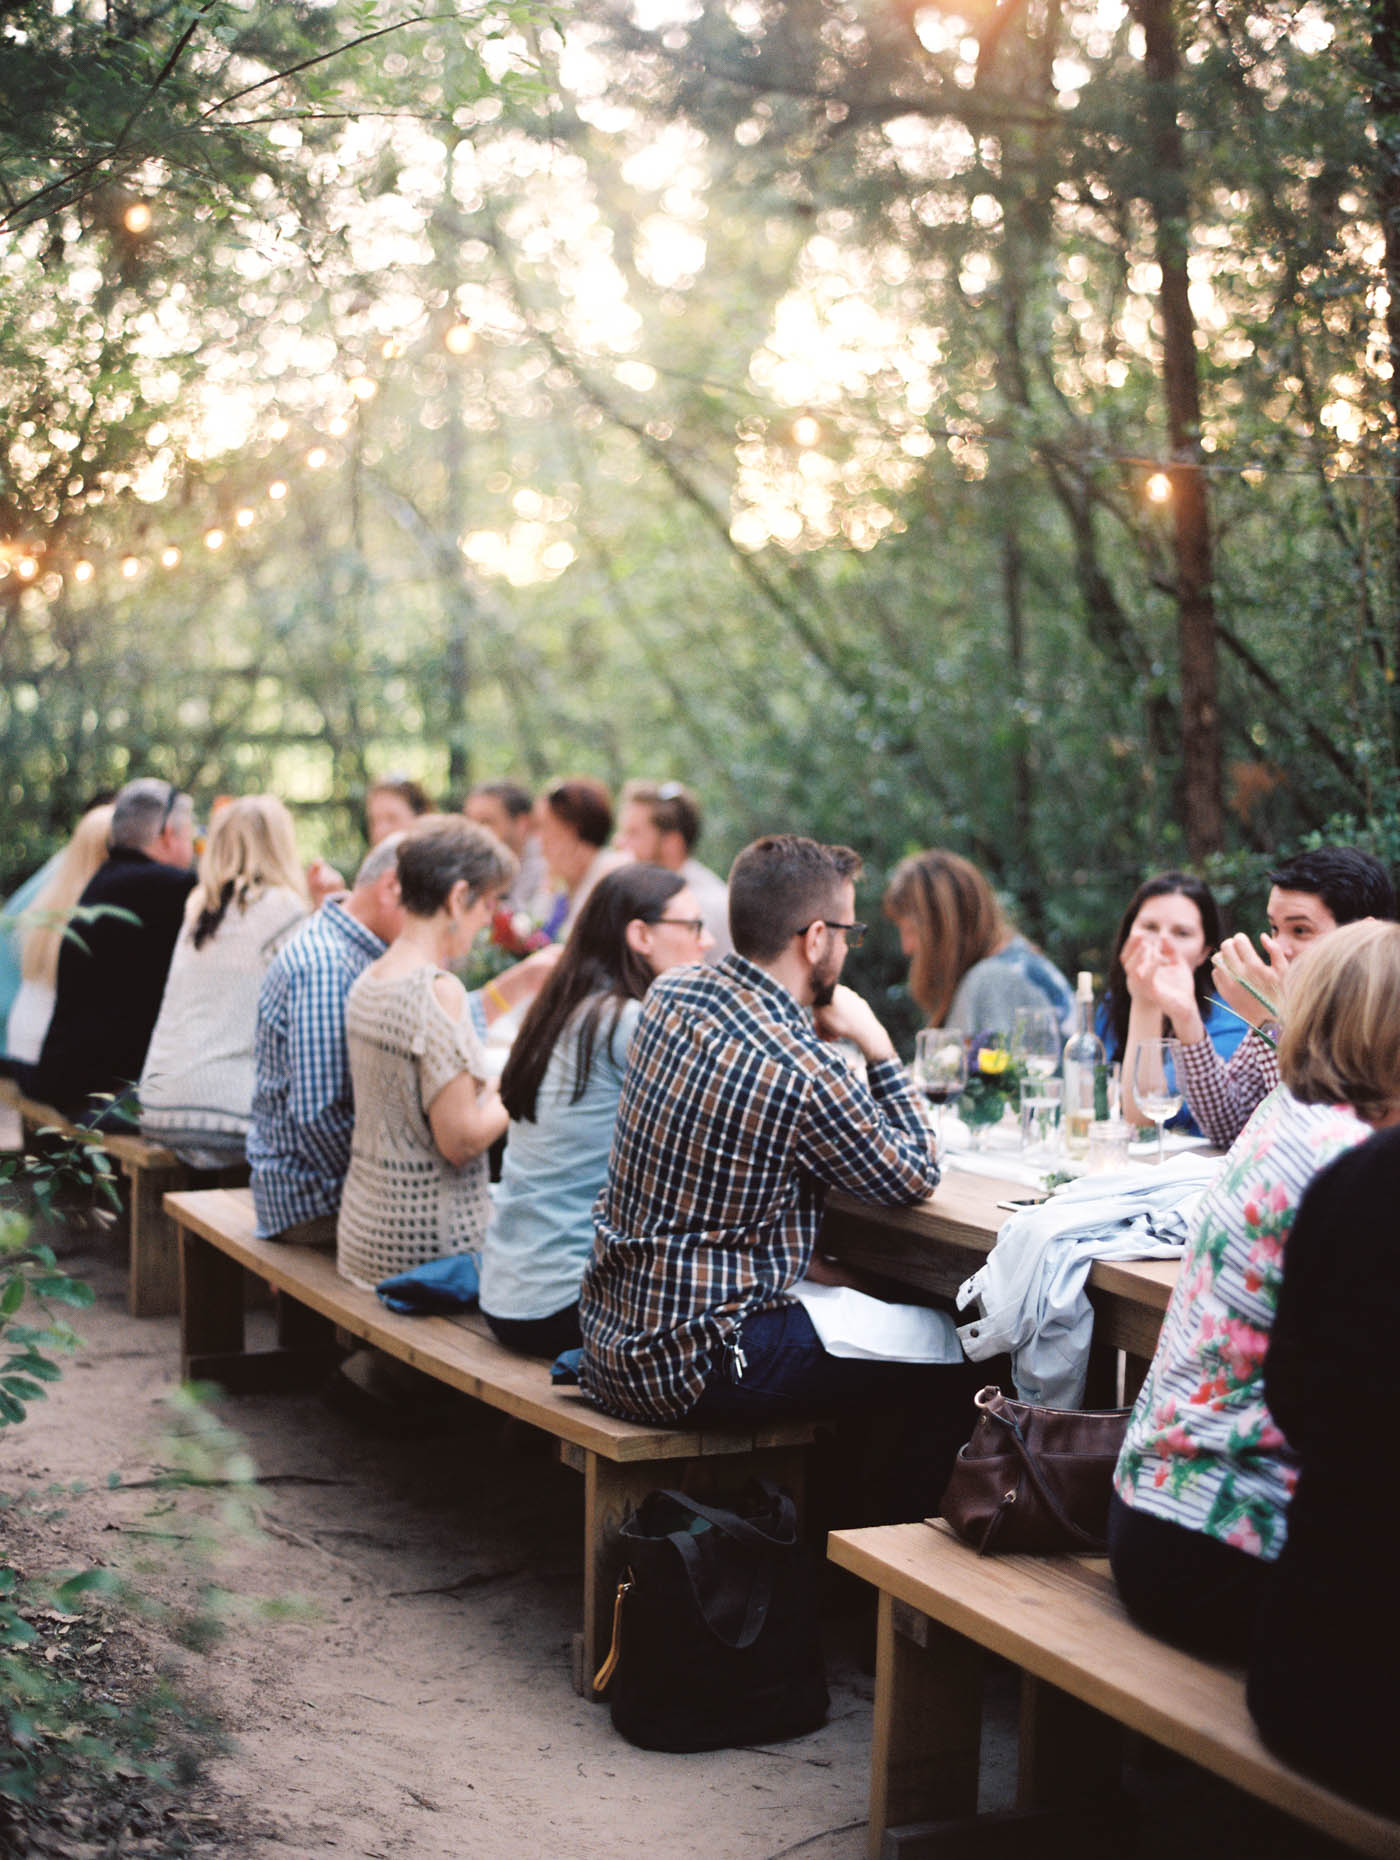 outdoor fine dining restaurant experience in texas